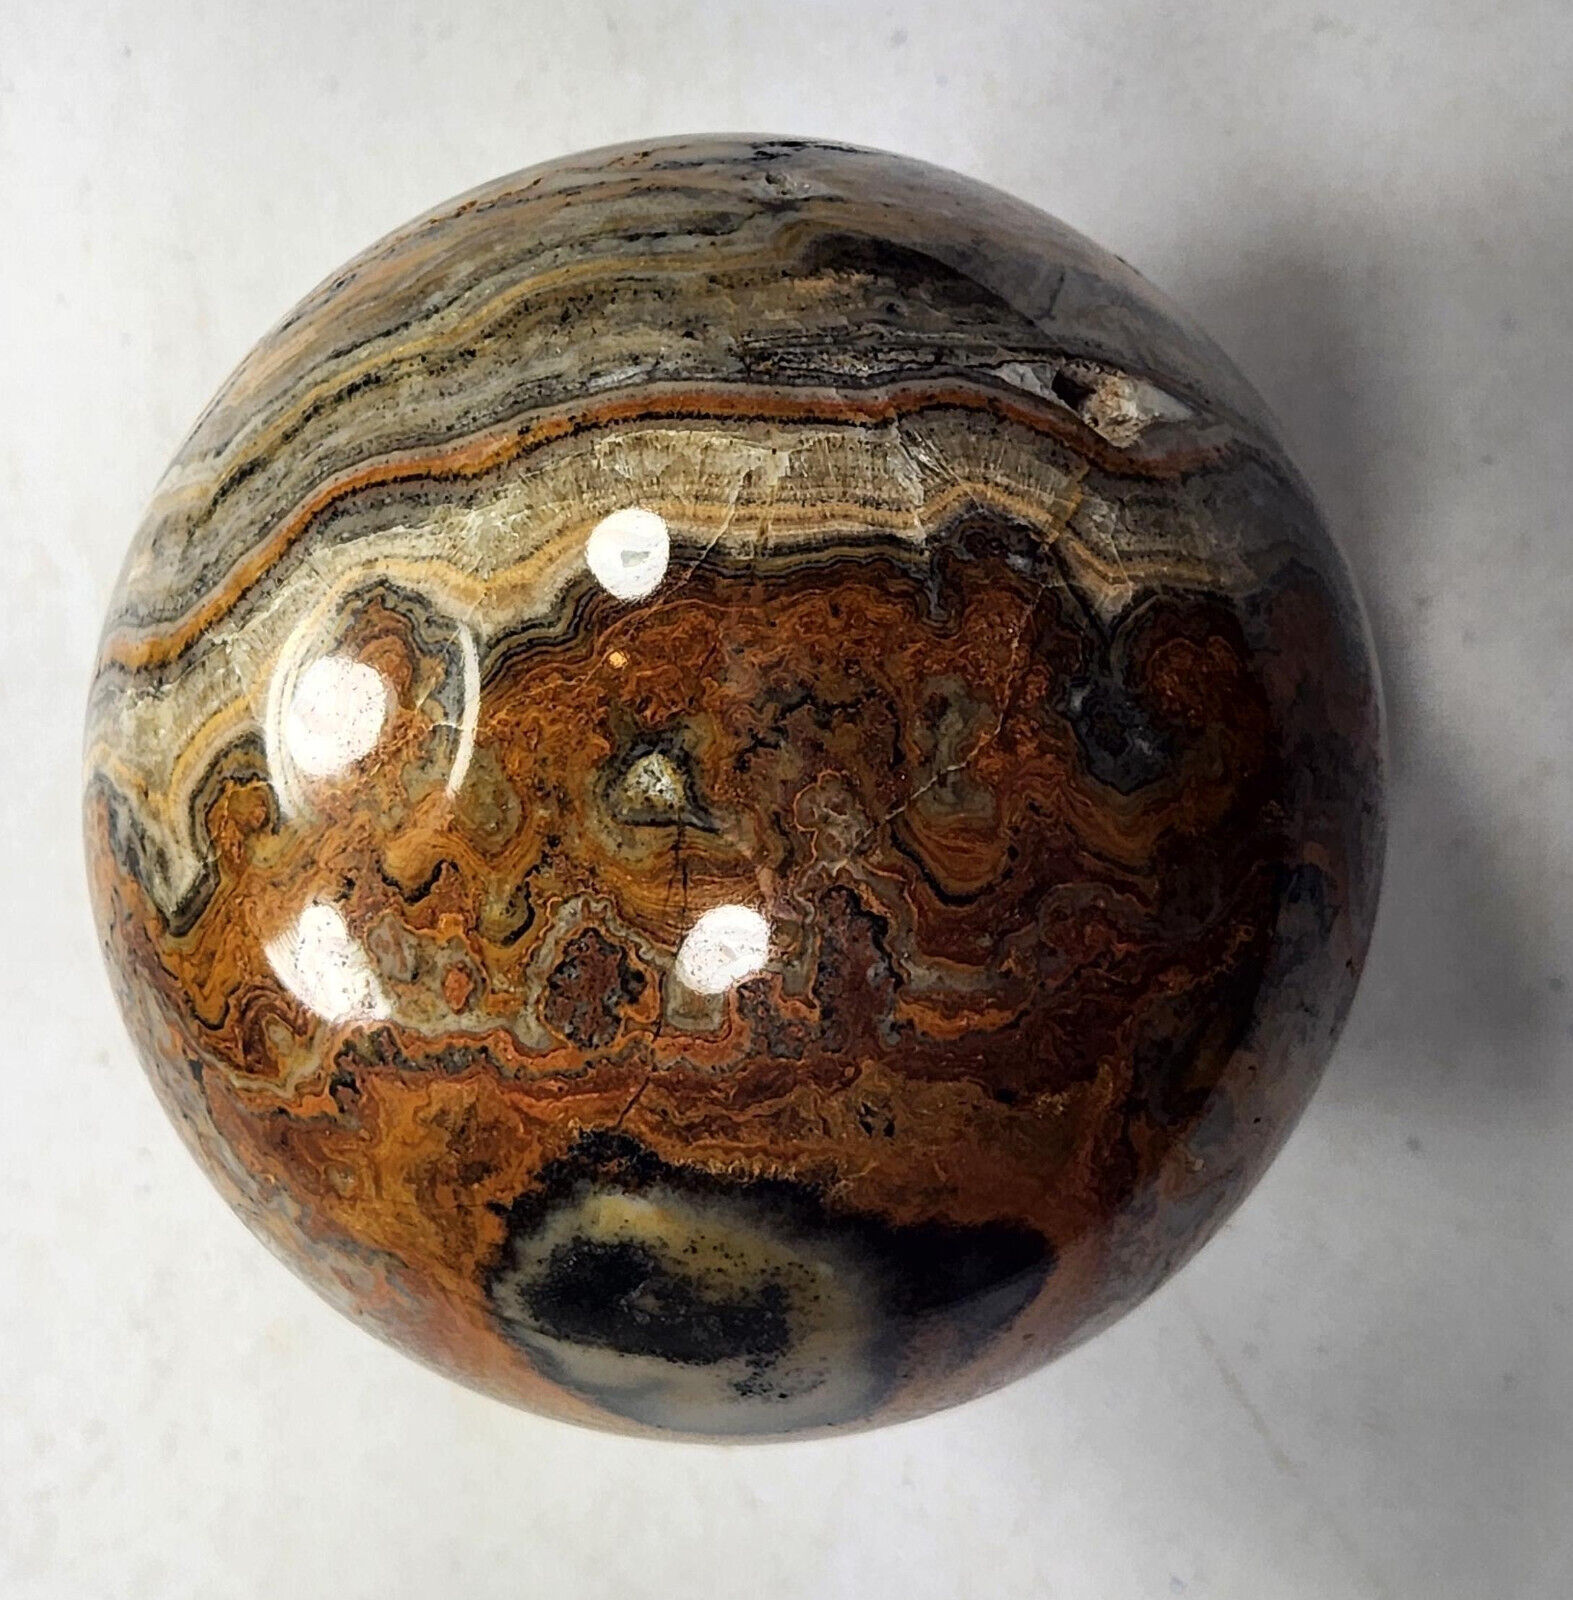 Large Onyx 101mm  Home Decorator Sphere from Mayer, AZ Unique Healing Gift 6117